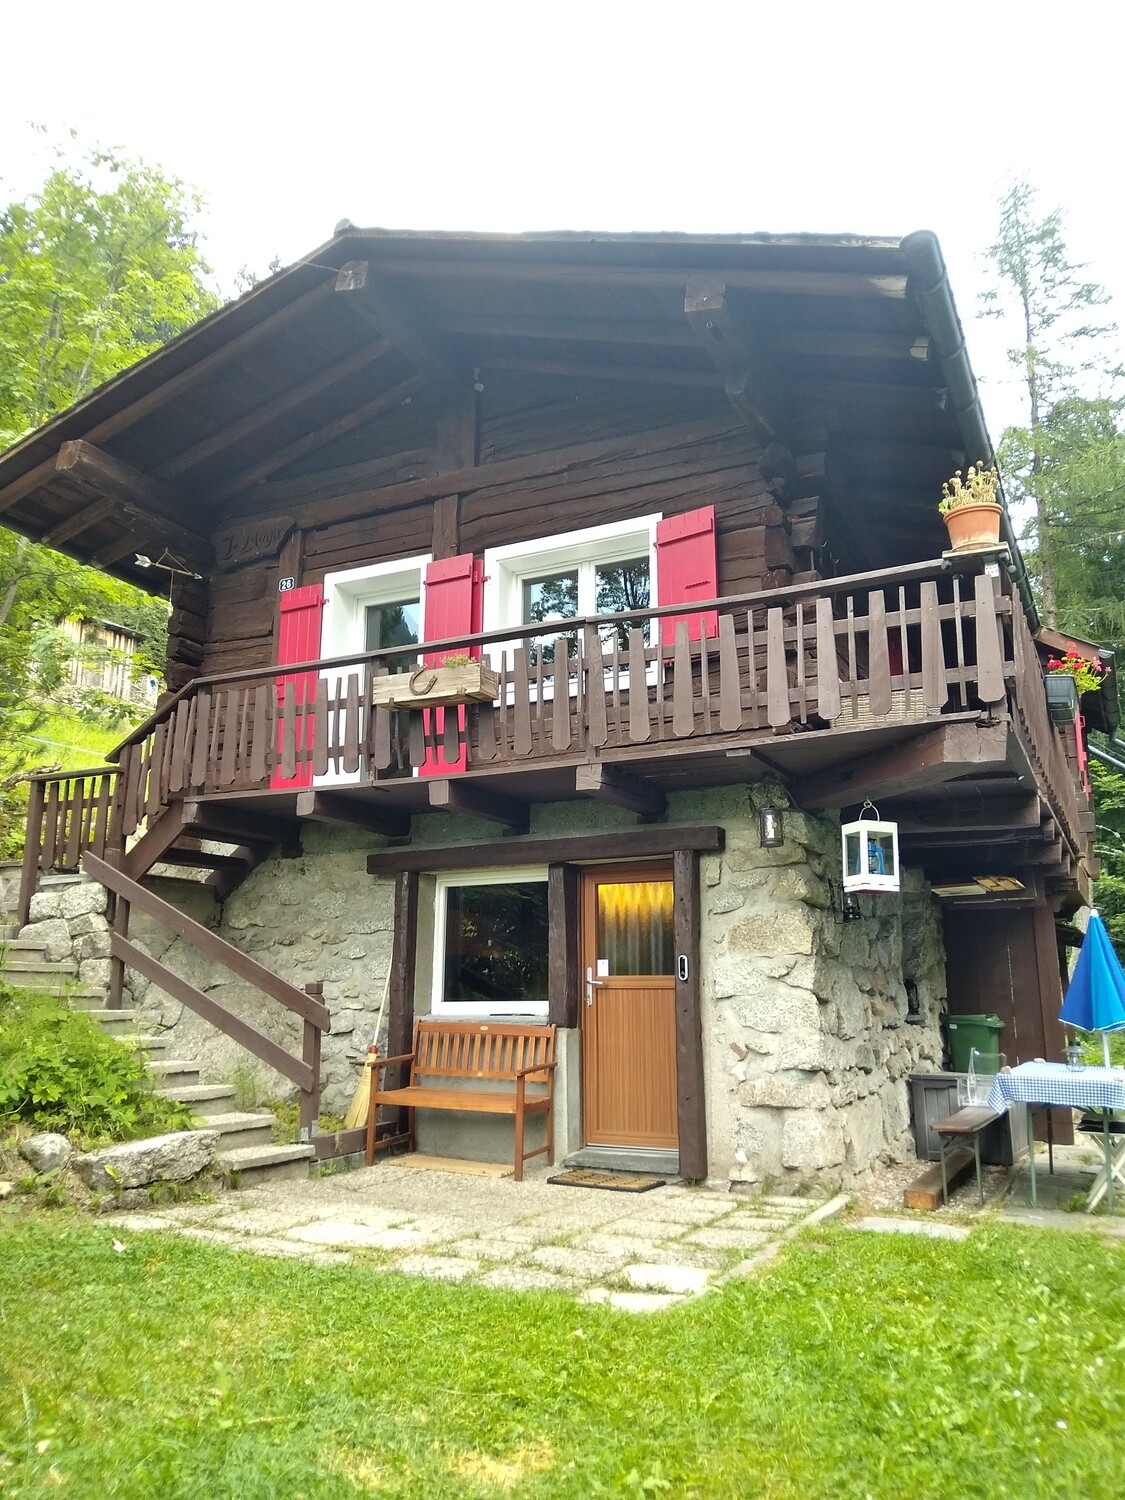 Small rustic and bucolic chalet - Check-in